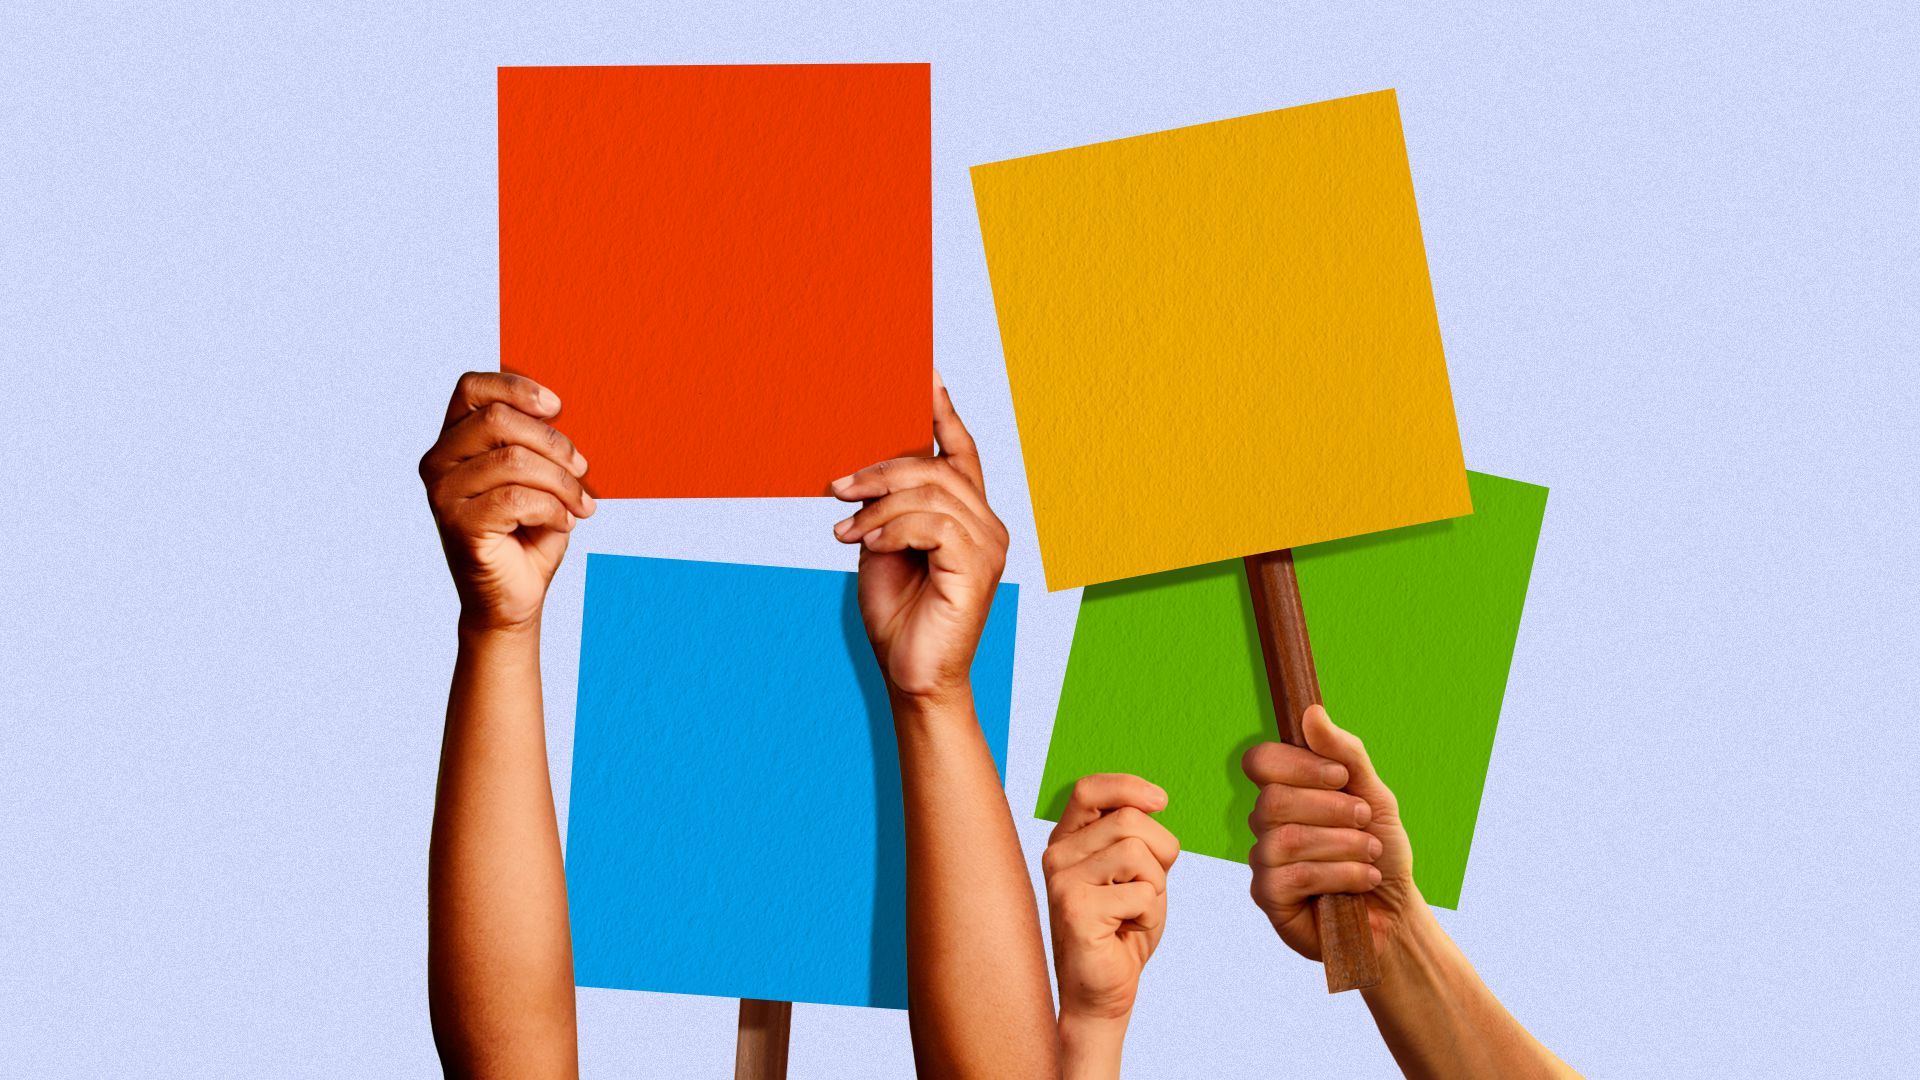 Illustration of people holding up signs in the shape of the Microsoft logo